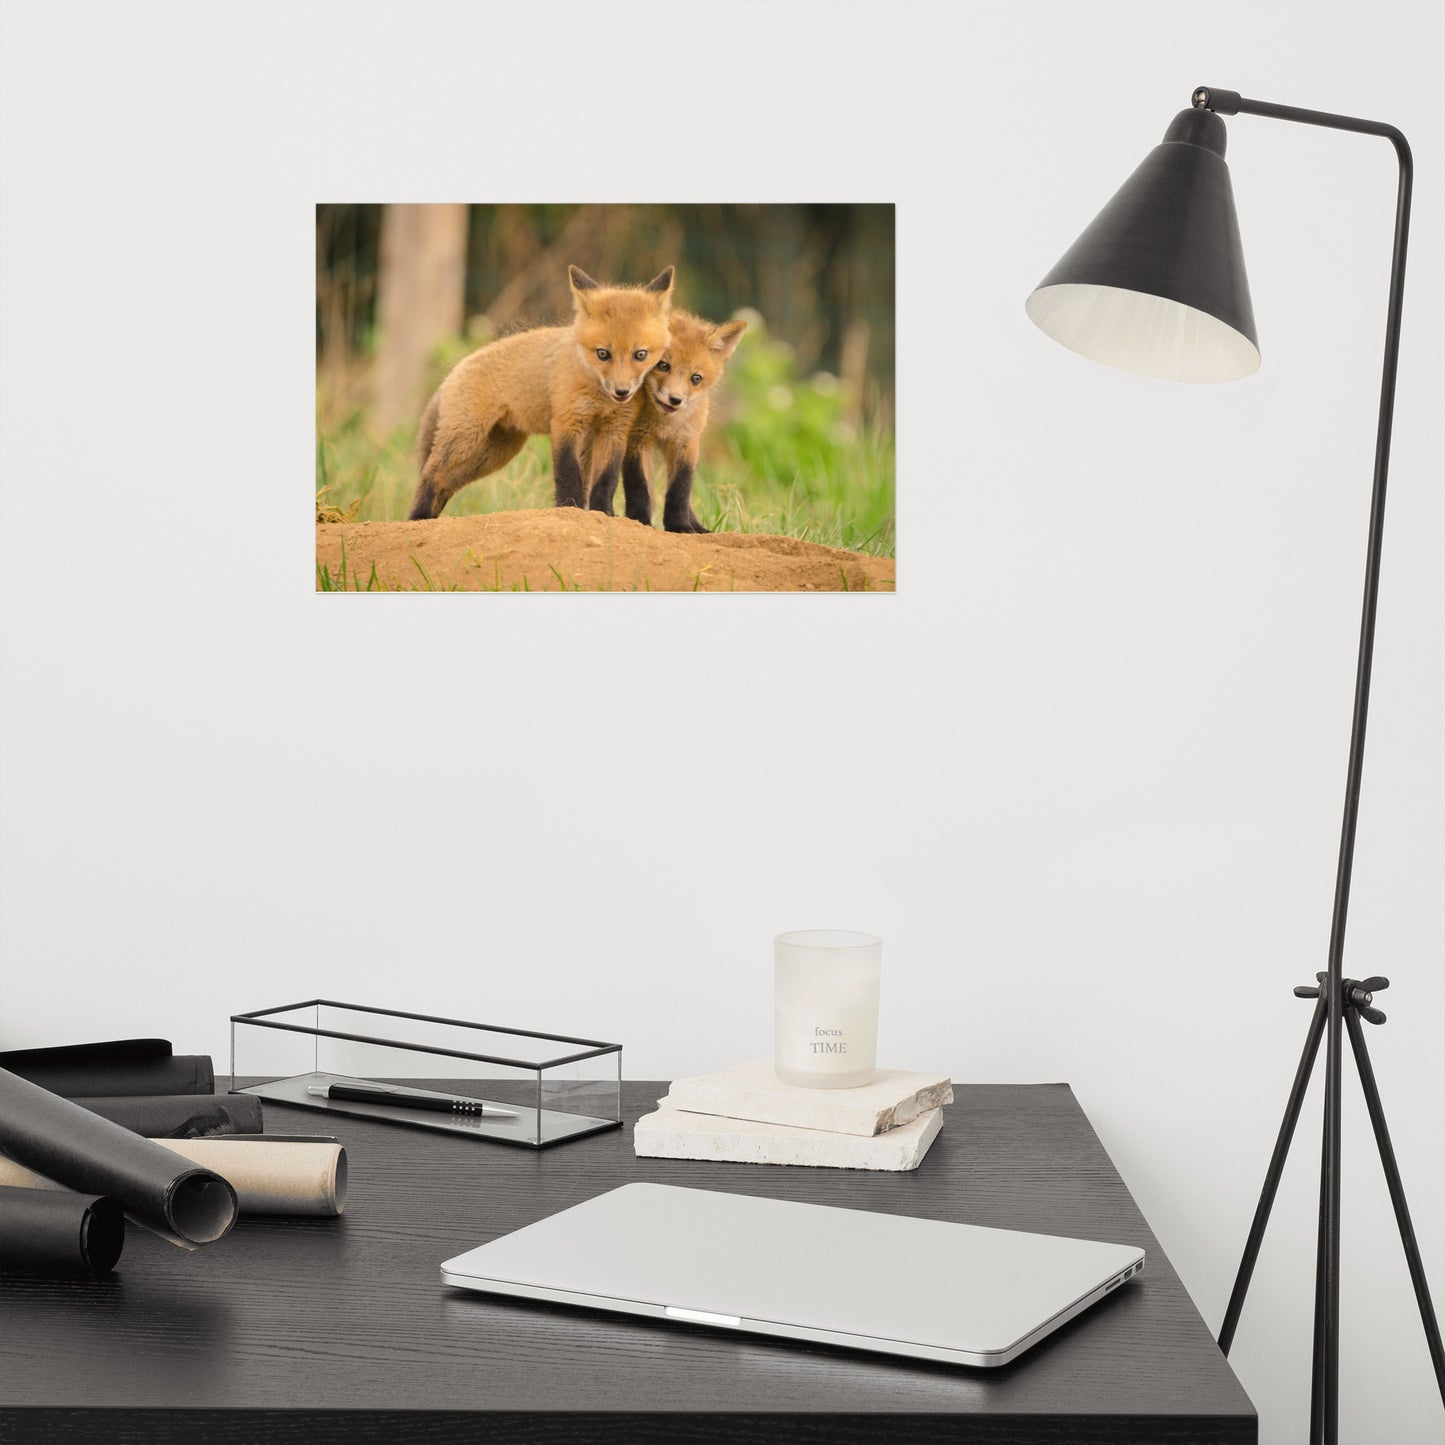 Modern Wall Decor For Nursery: Close to You Animal / Wildlife / Nature Photograph Loose / Unframed / Frameless / Frameable Wall Art Prints